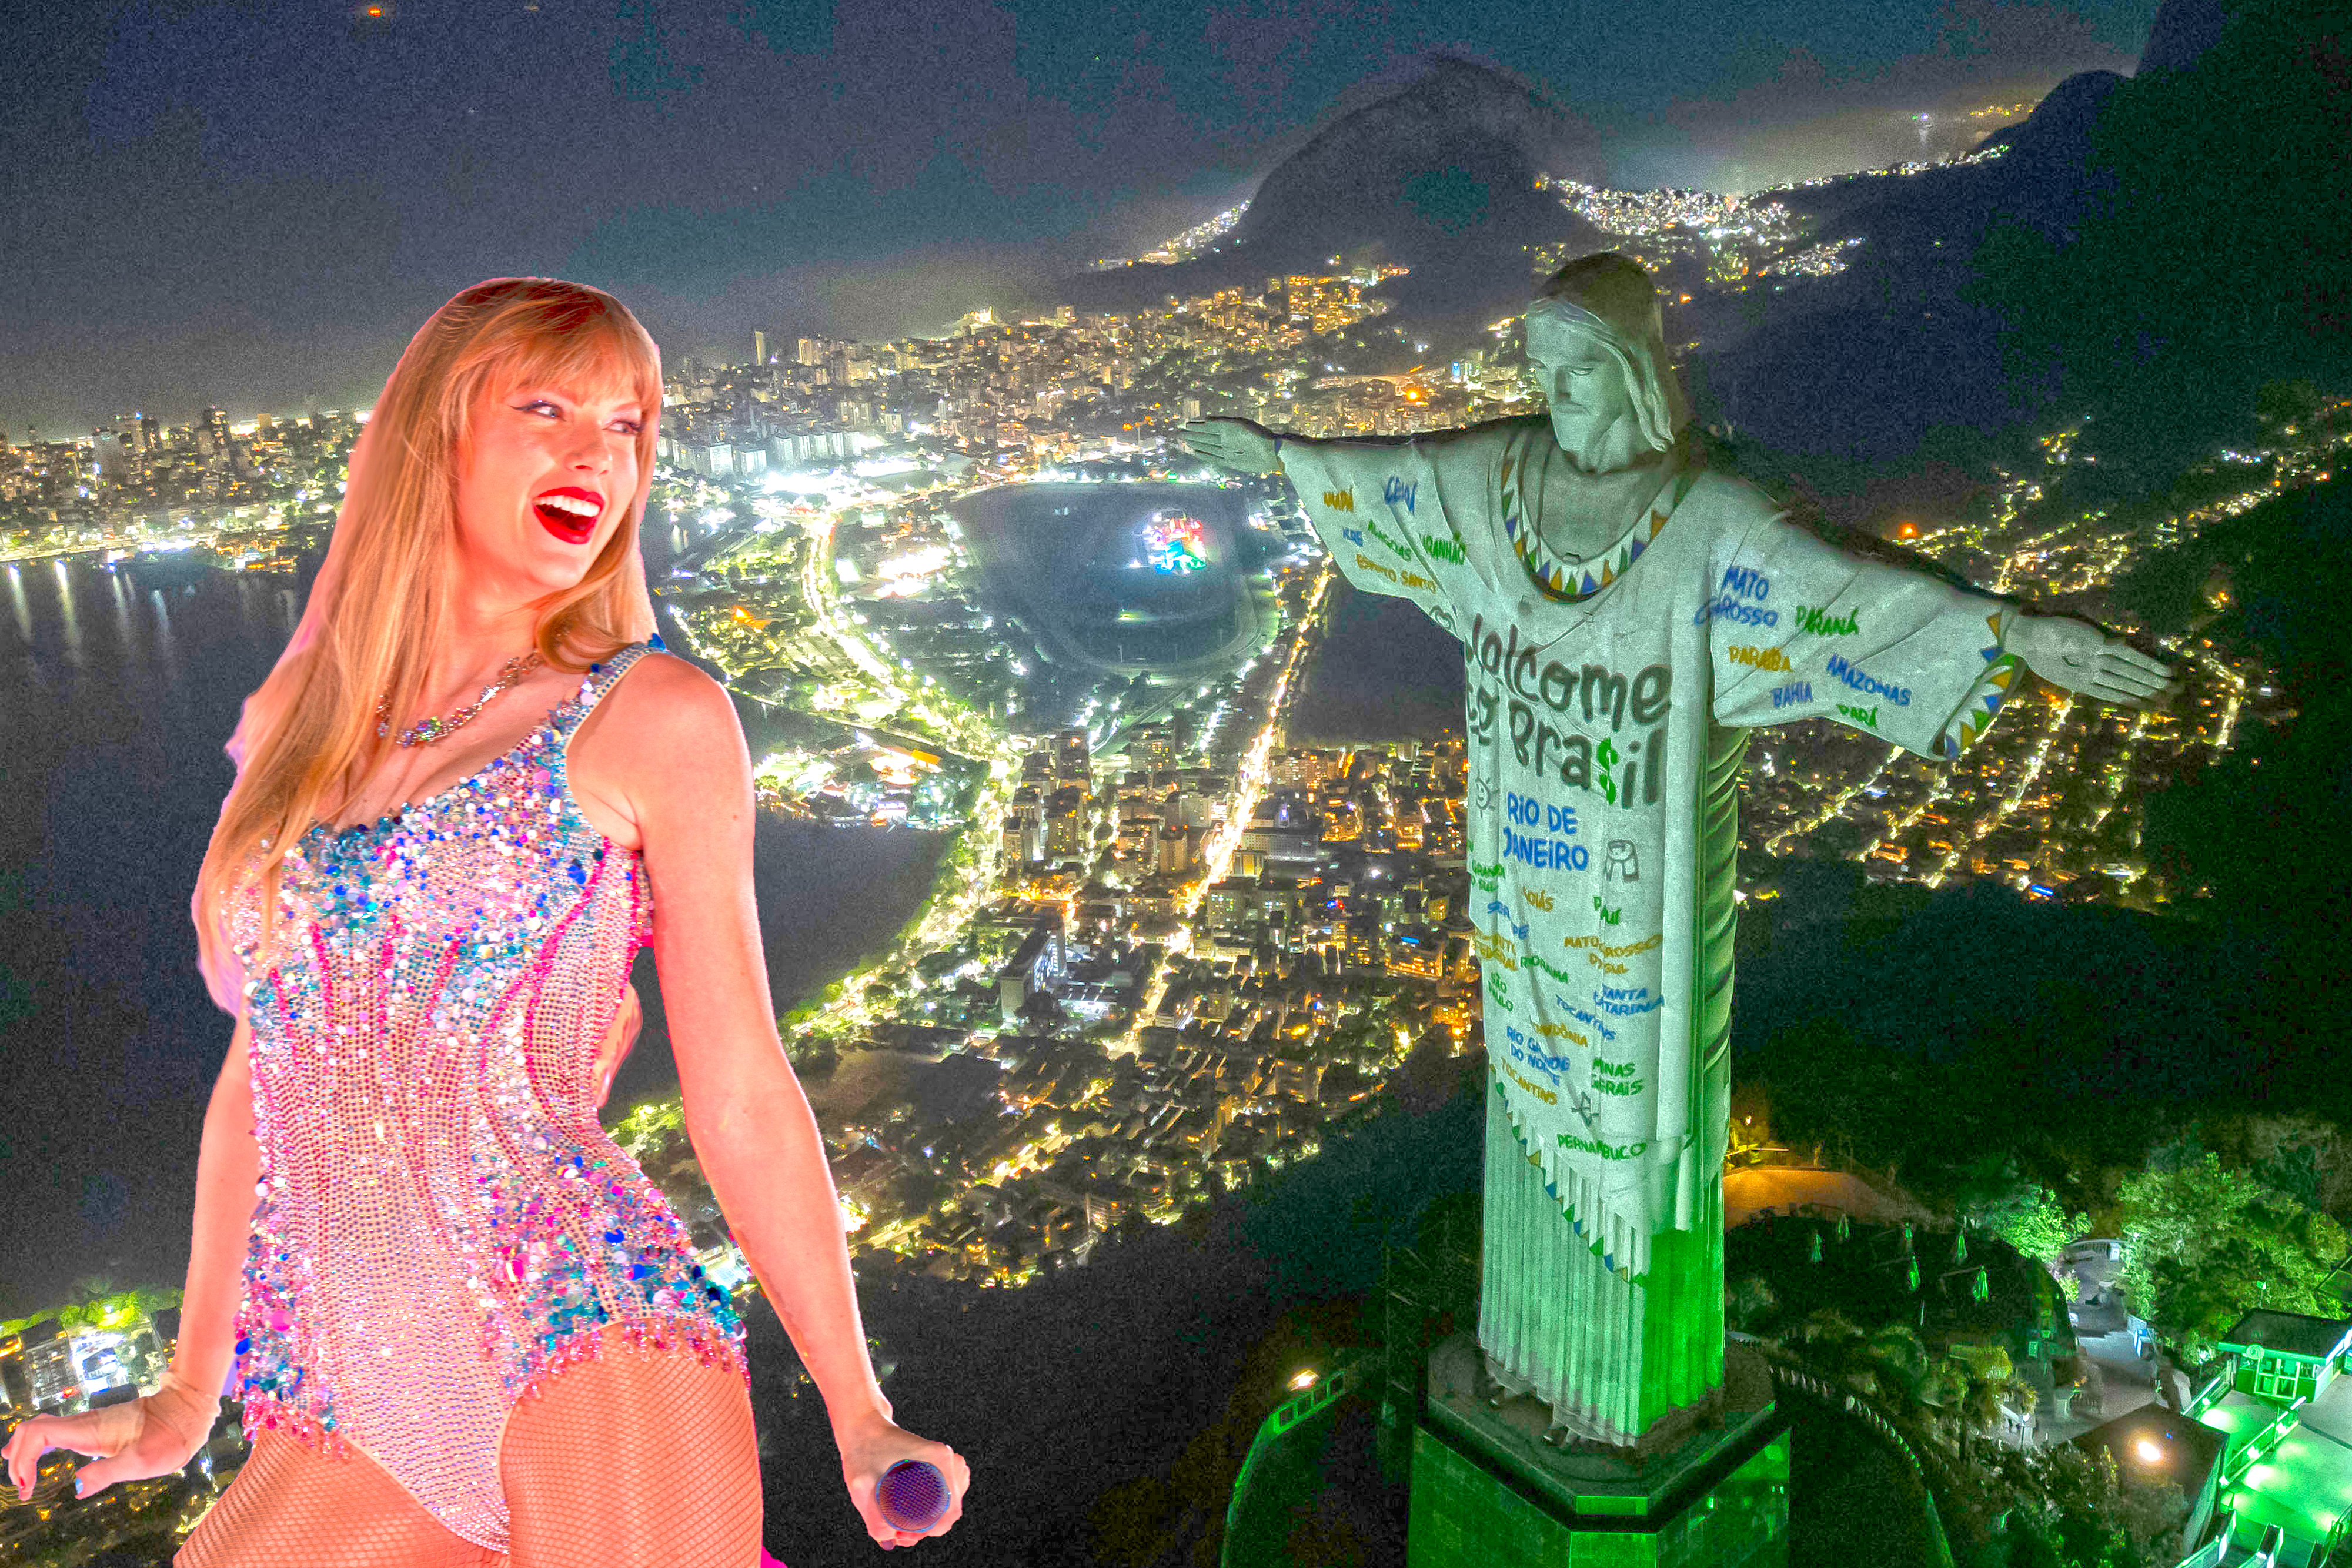 Rio's Christ the Redeemer statue welcomes Taylor Swift with open